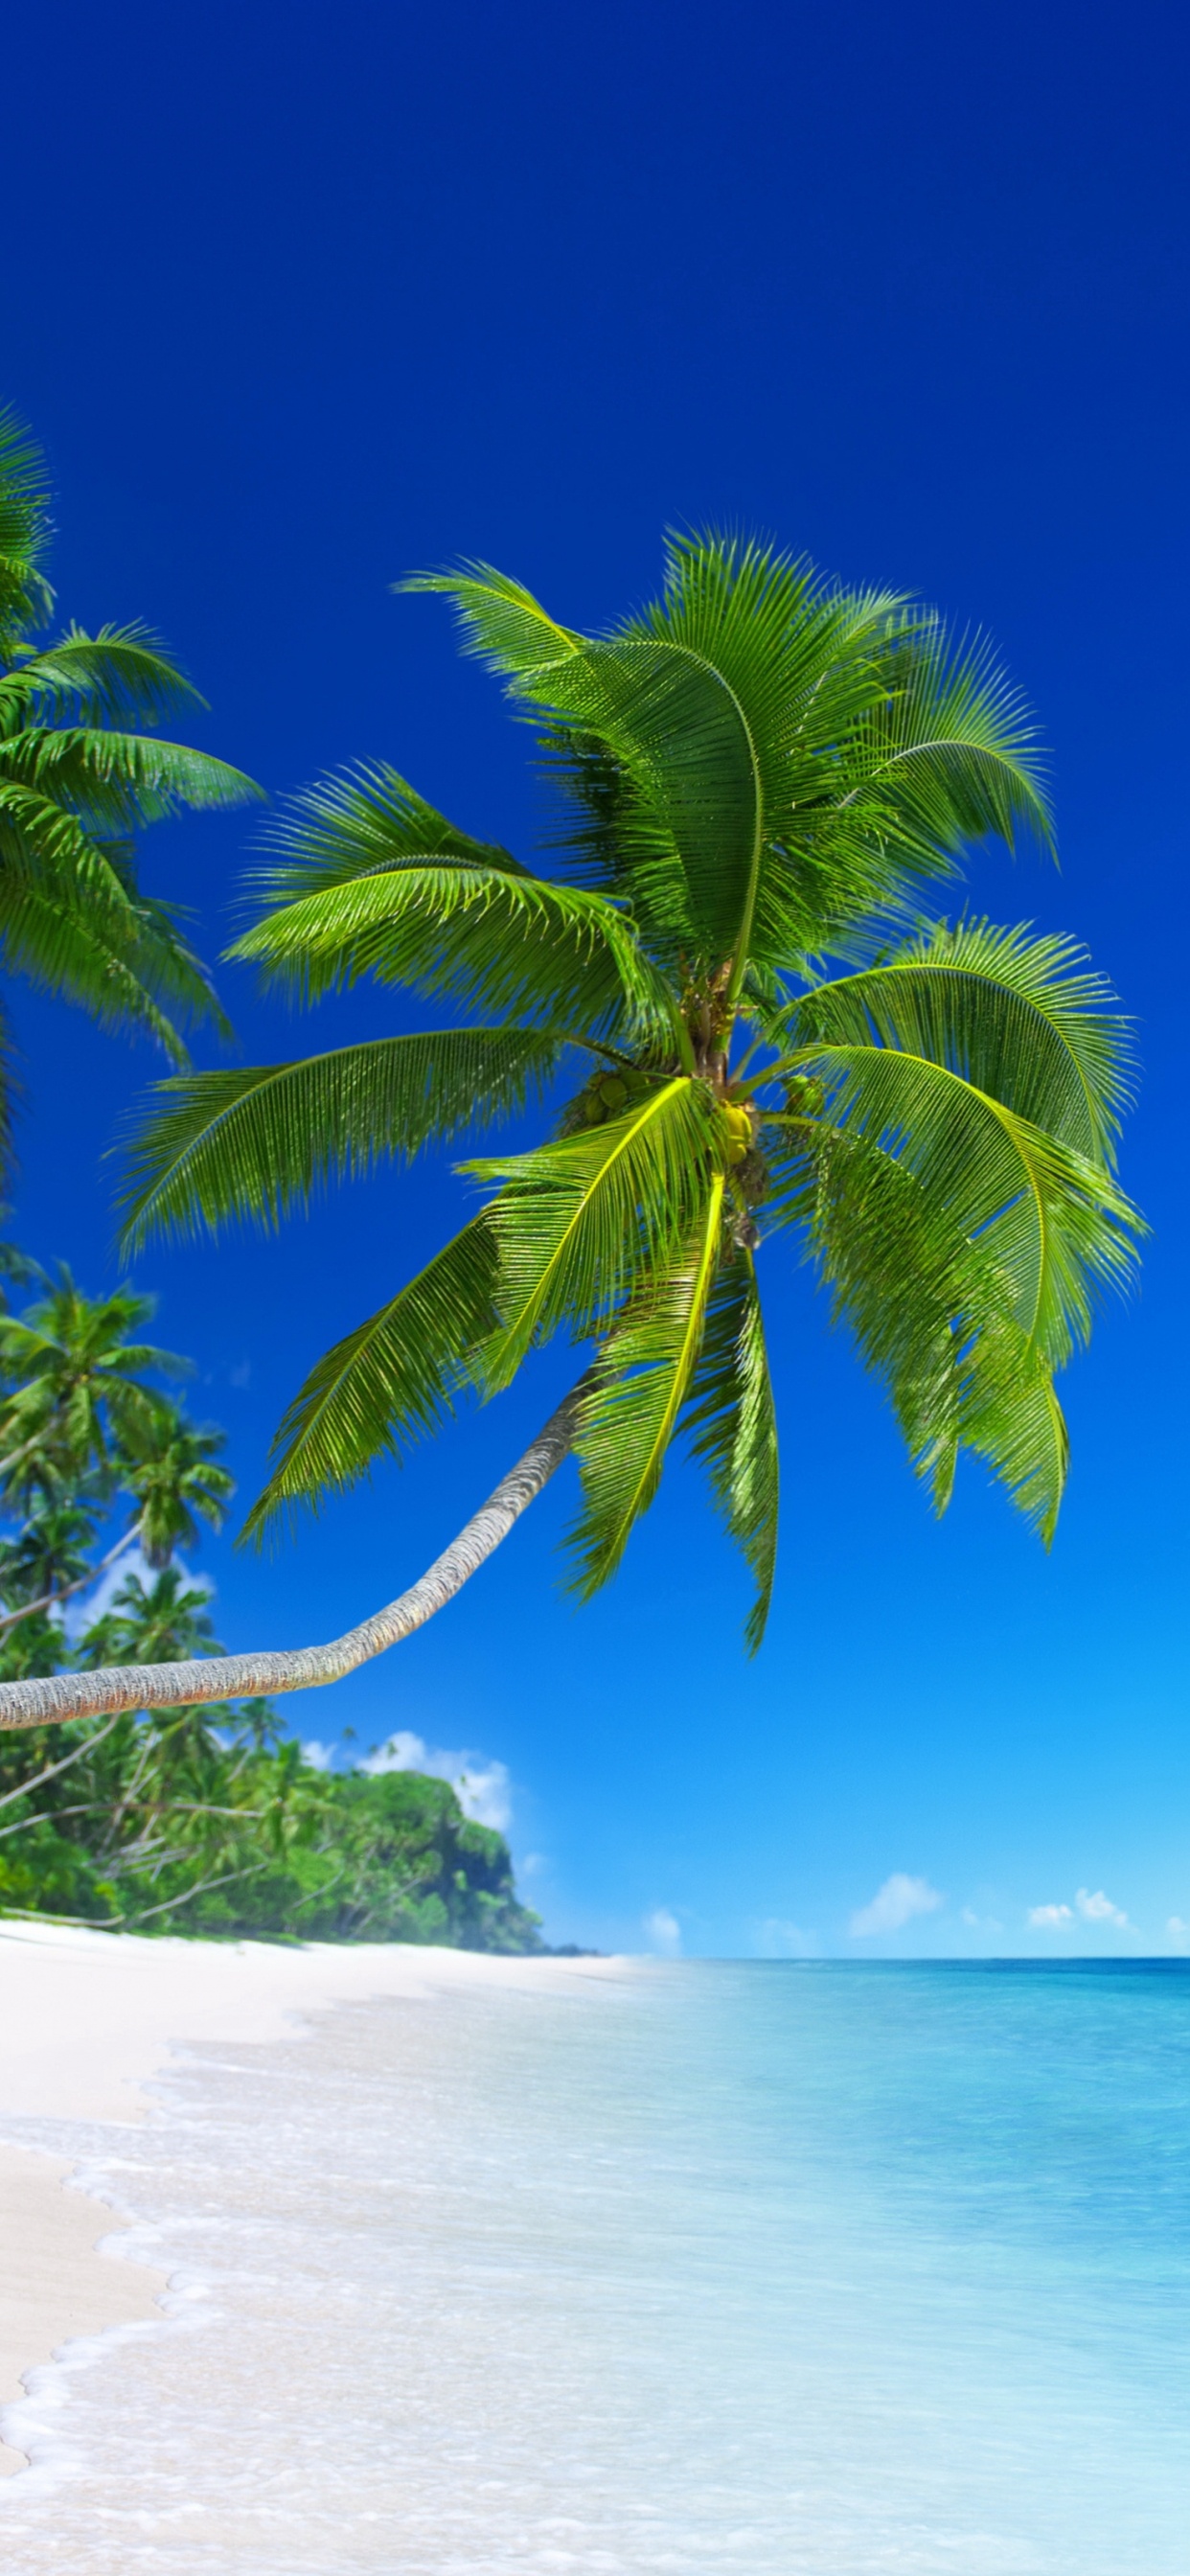 Green Palm Tree on White Sand Beach During Daytime. Wallpaper in 1242x2688 Resolution